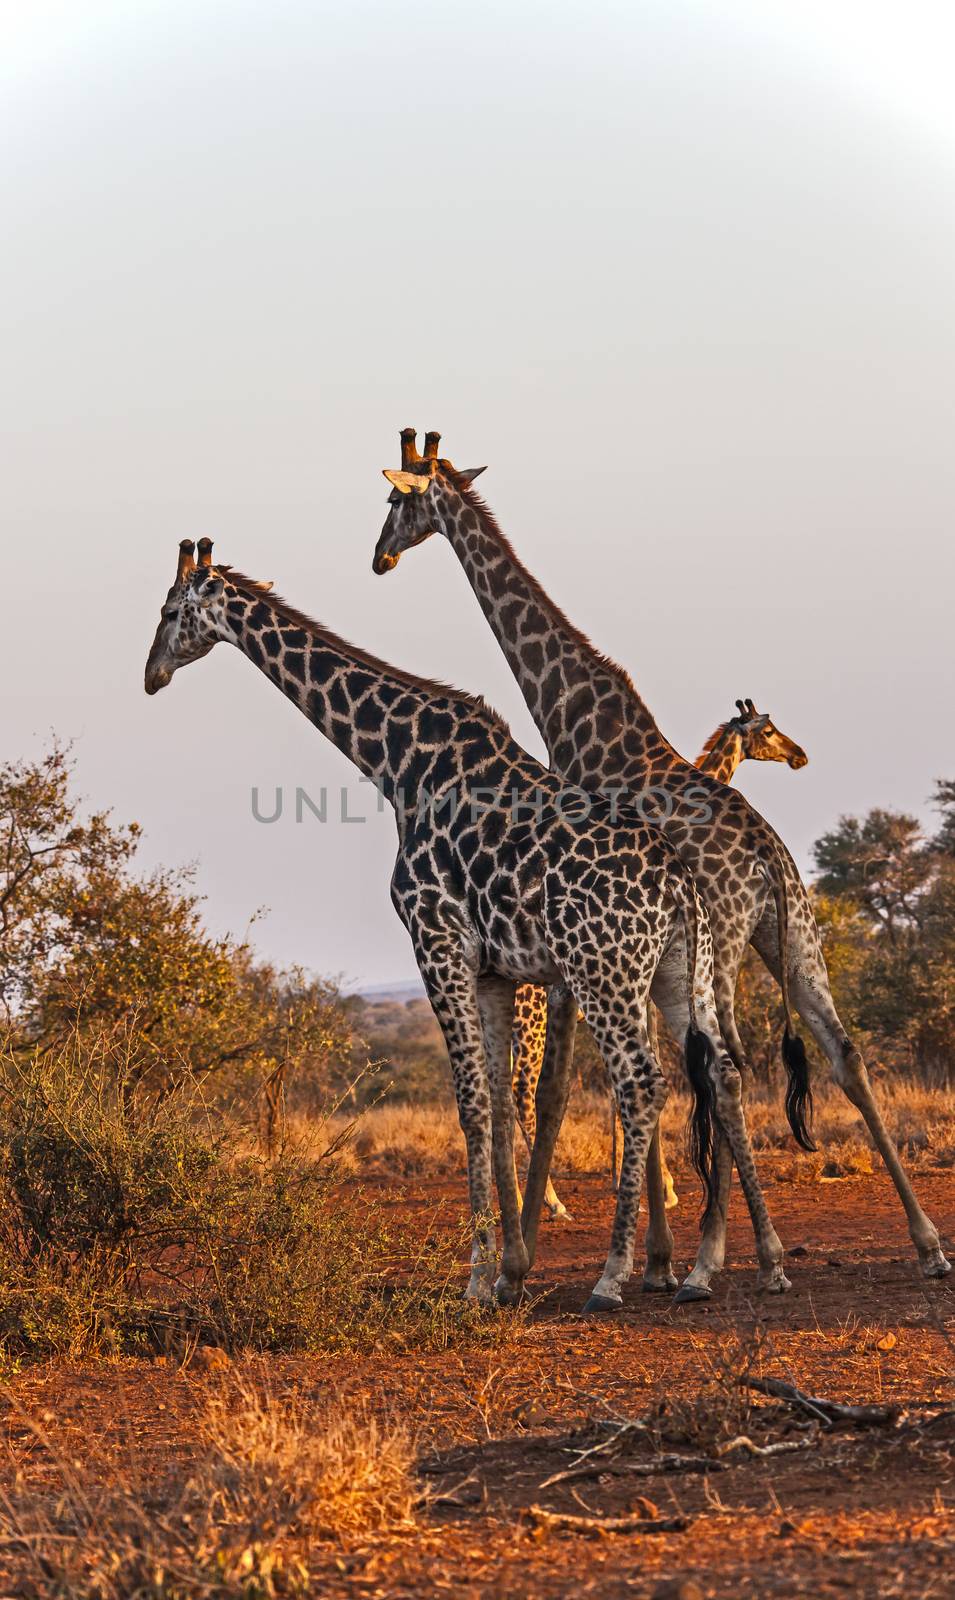 A group of giraffes photographed at sunset in the Kruger National Park, South Africa.